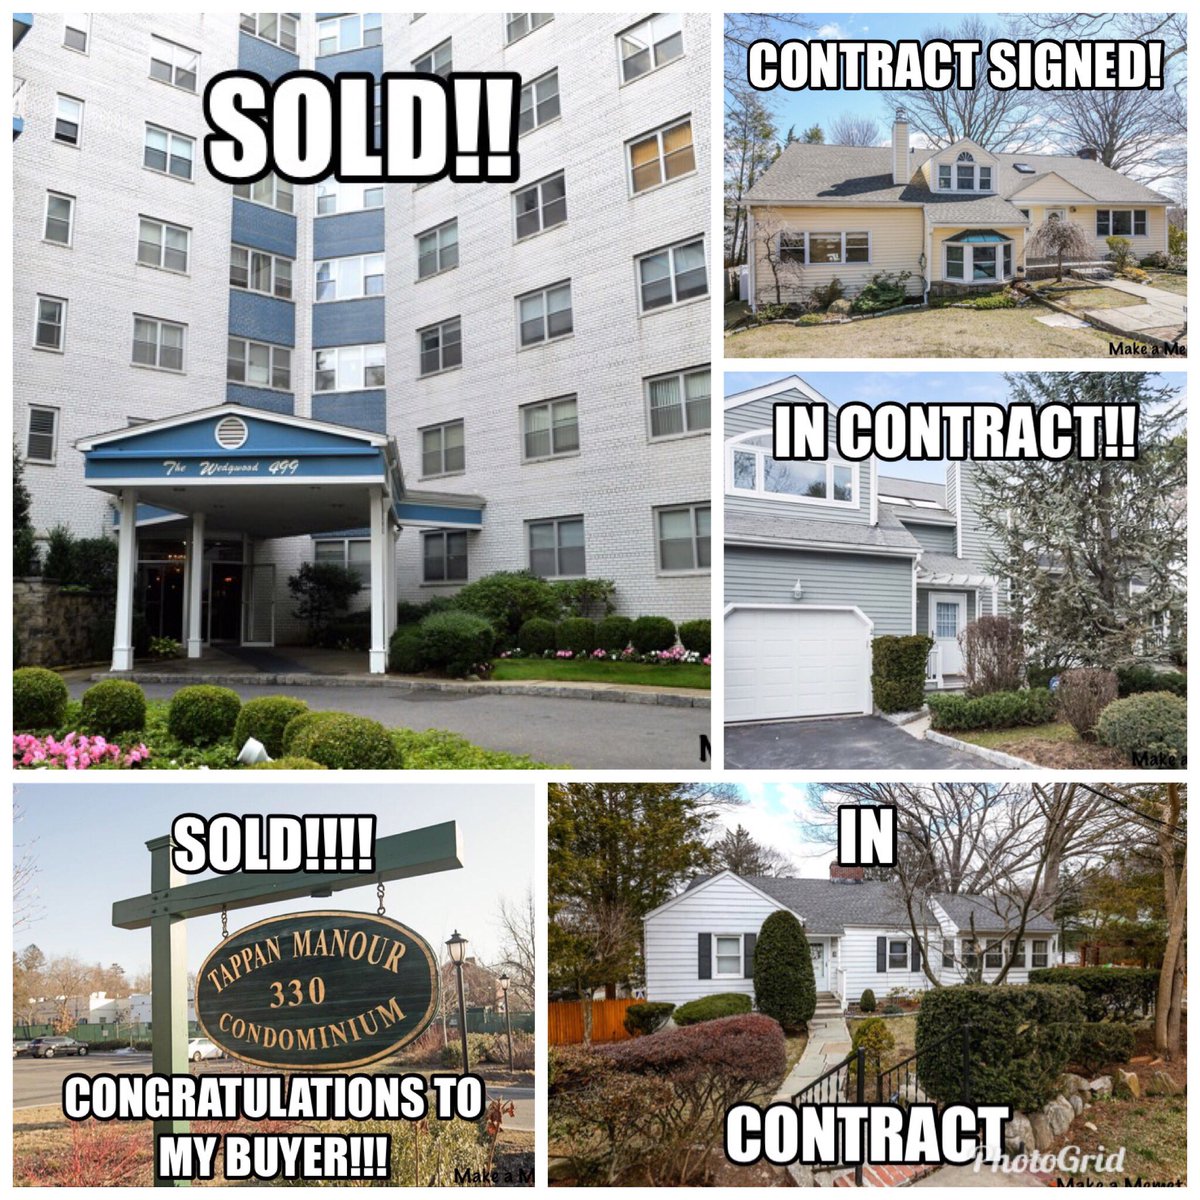 What a busy real estate week!  Thinking of buying or selling? I can help! #realestate #realestateagent #selling #sellinghomes #sellingdreams #lovemyjob #sold #incontract #westchester #ny #realtorlife #timetosell #timetobuy #renatasellshomes #westchester #westchesterrealtor